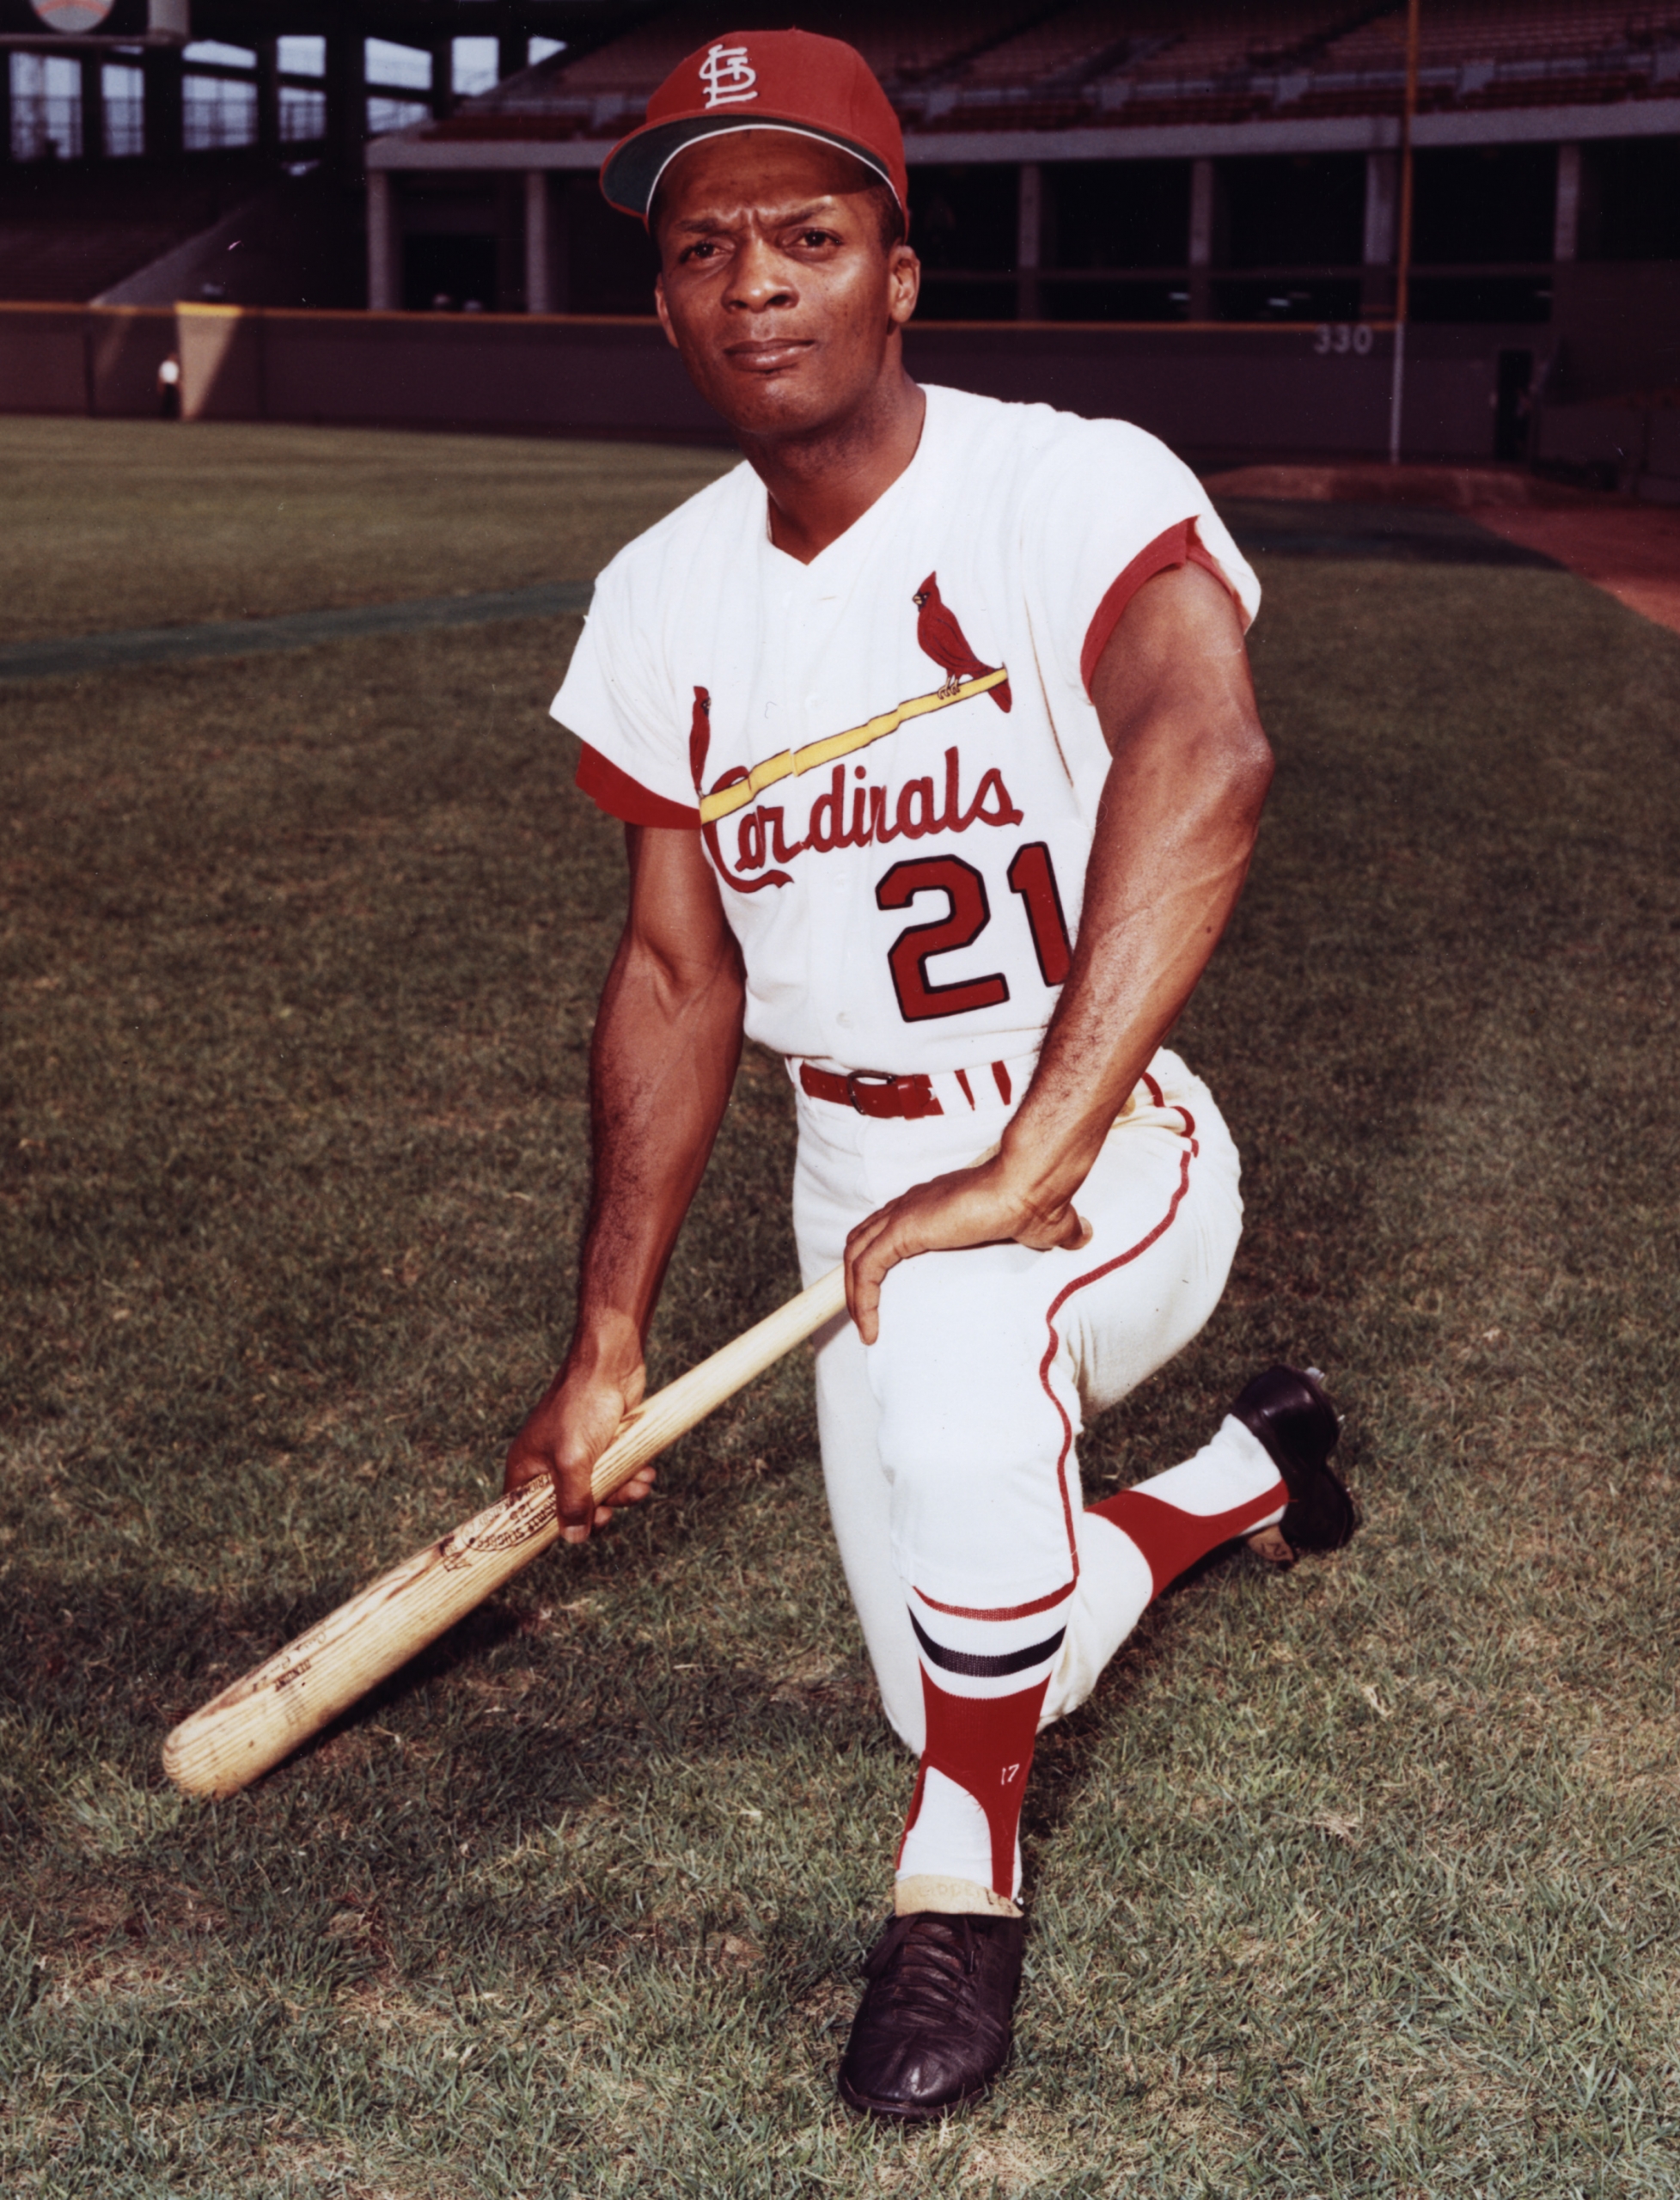 Jersey for the St. Louis Cardinals worn by Curt Flood